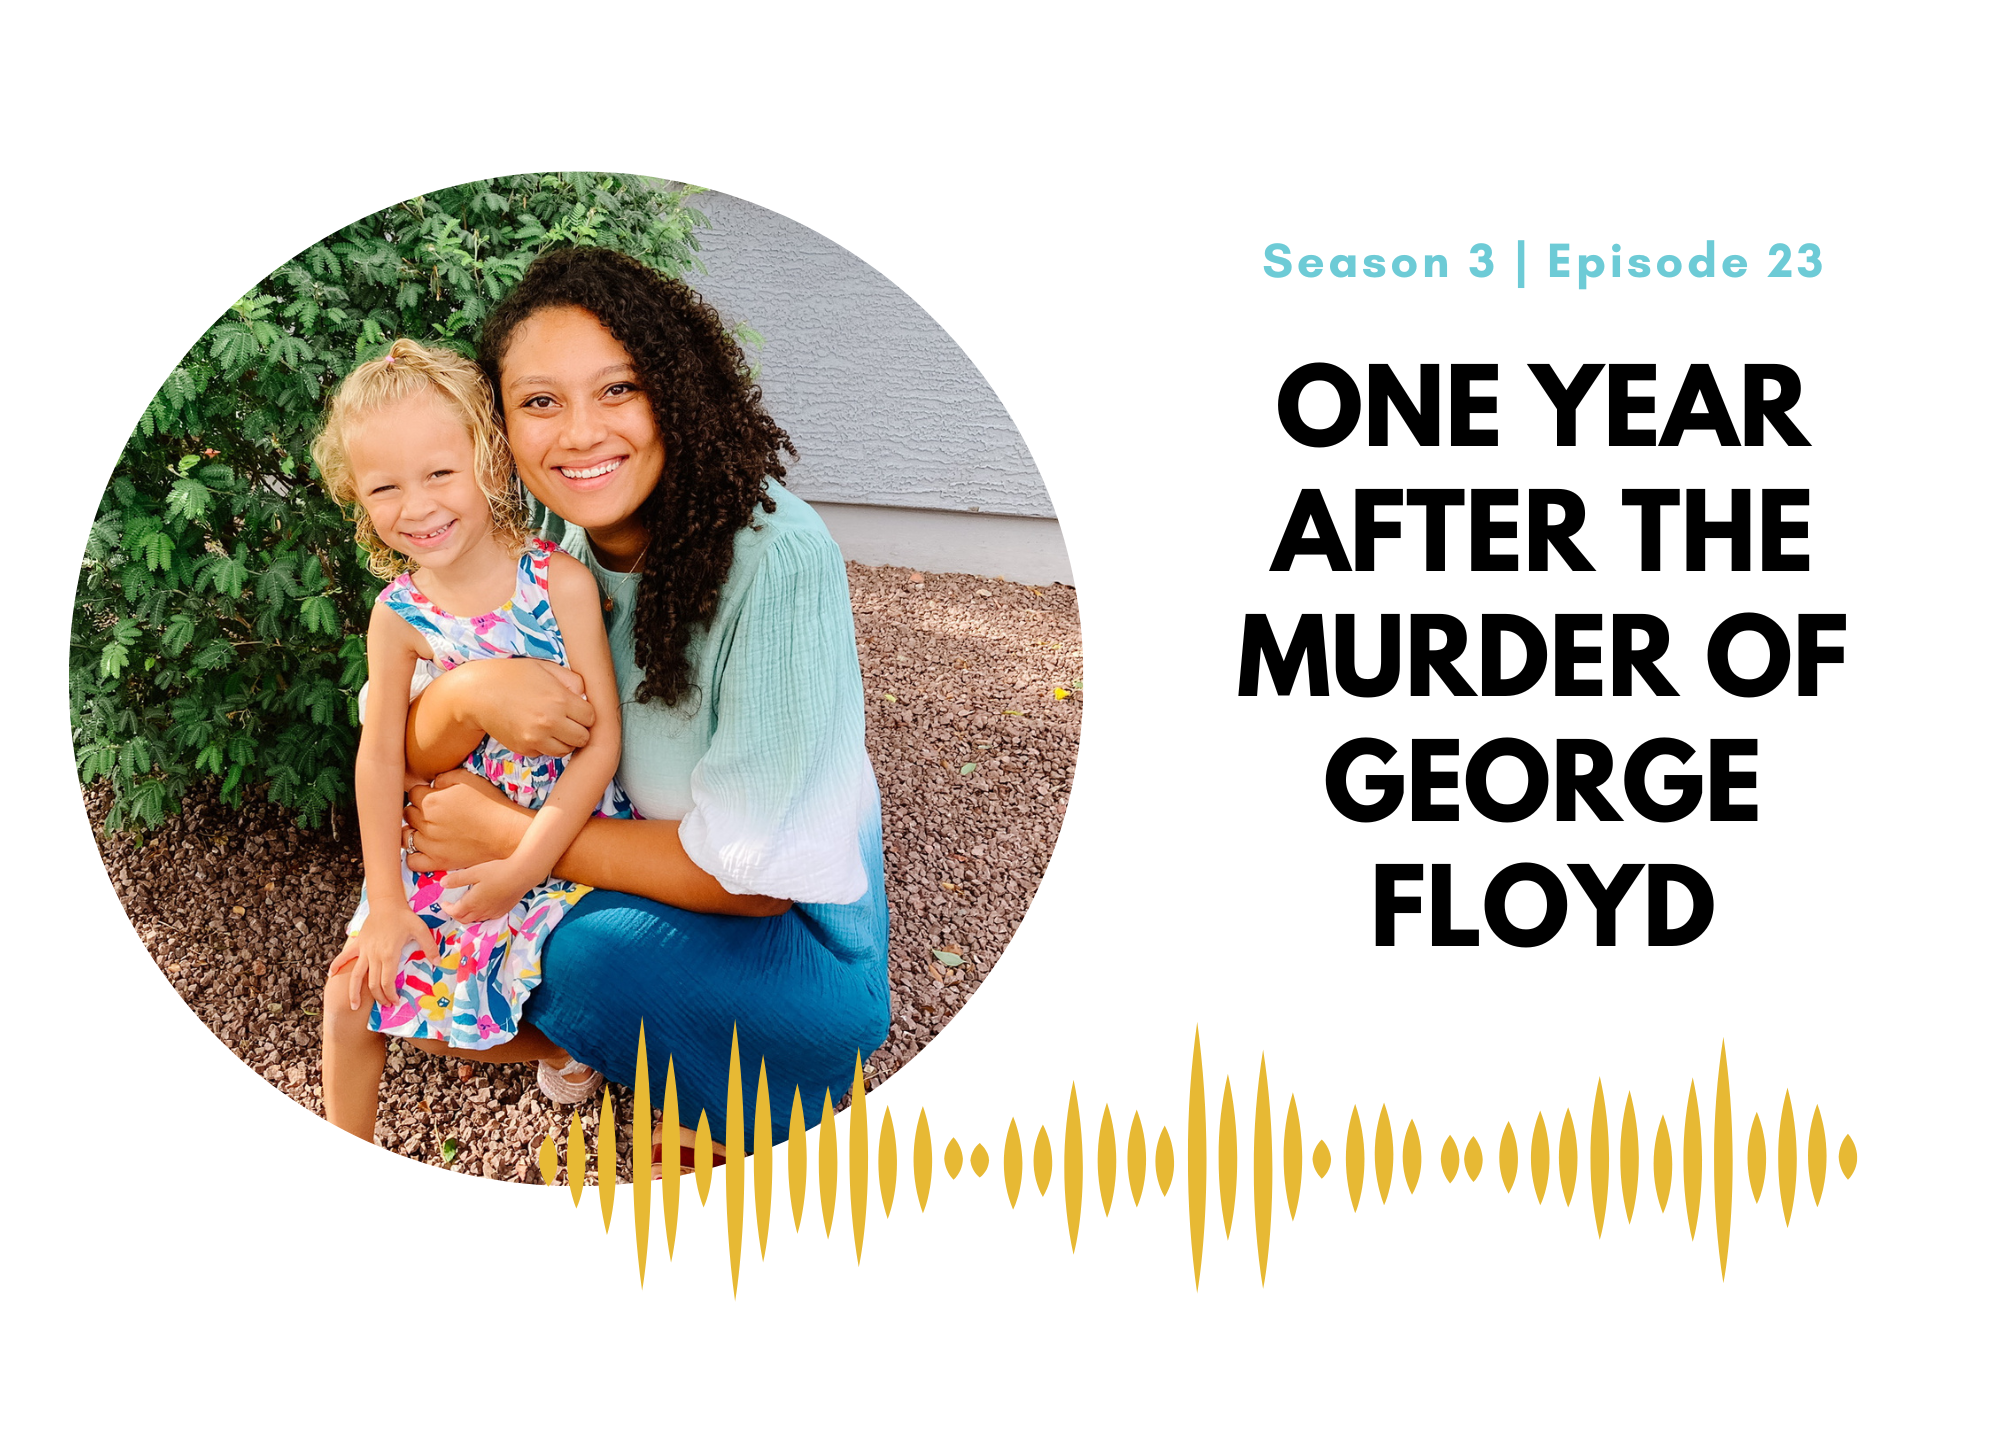 One Year After the Murder of George Floyd